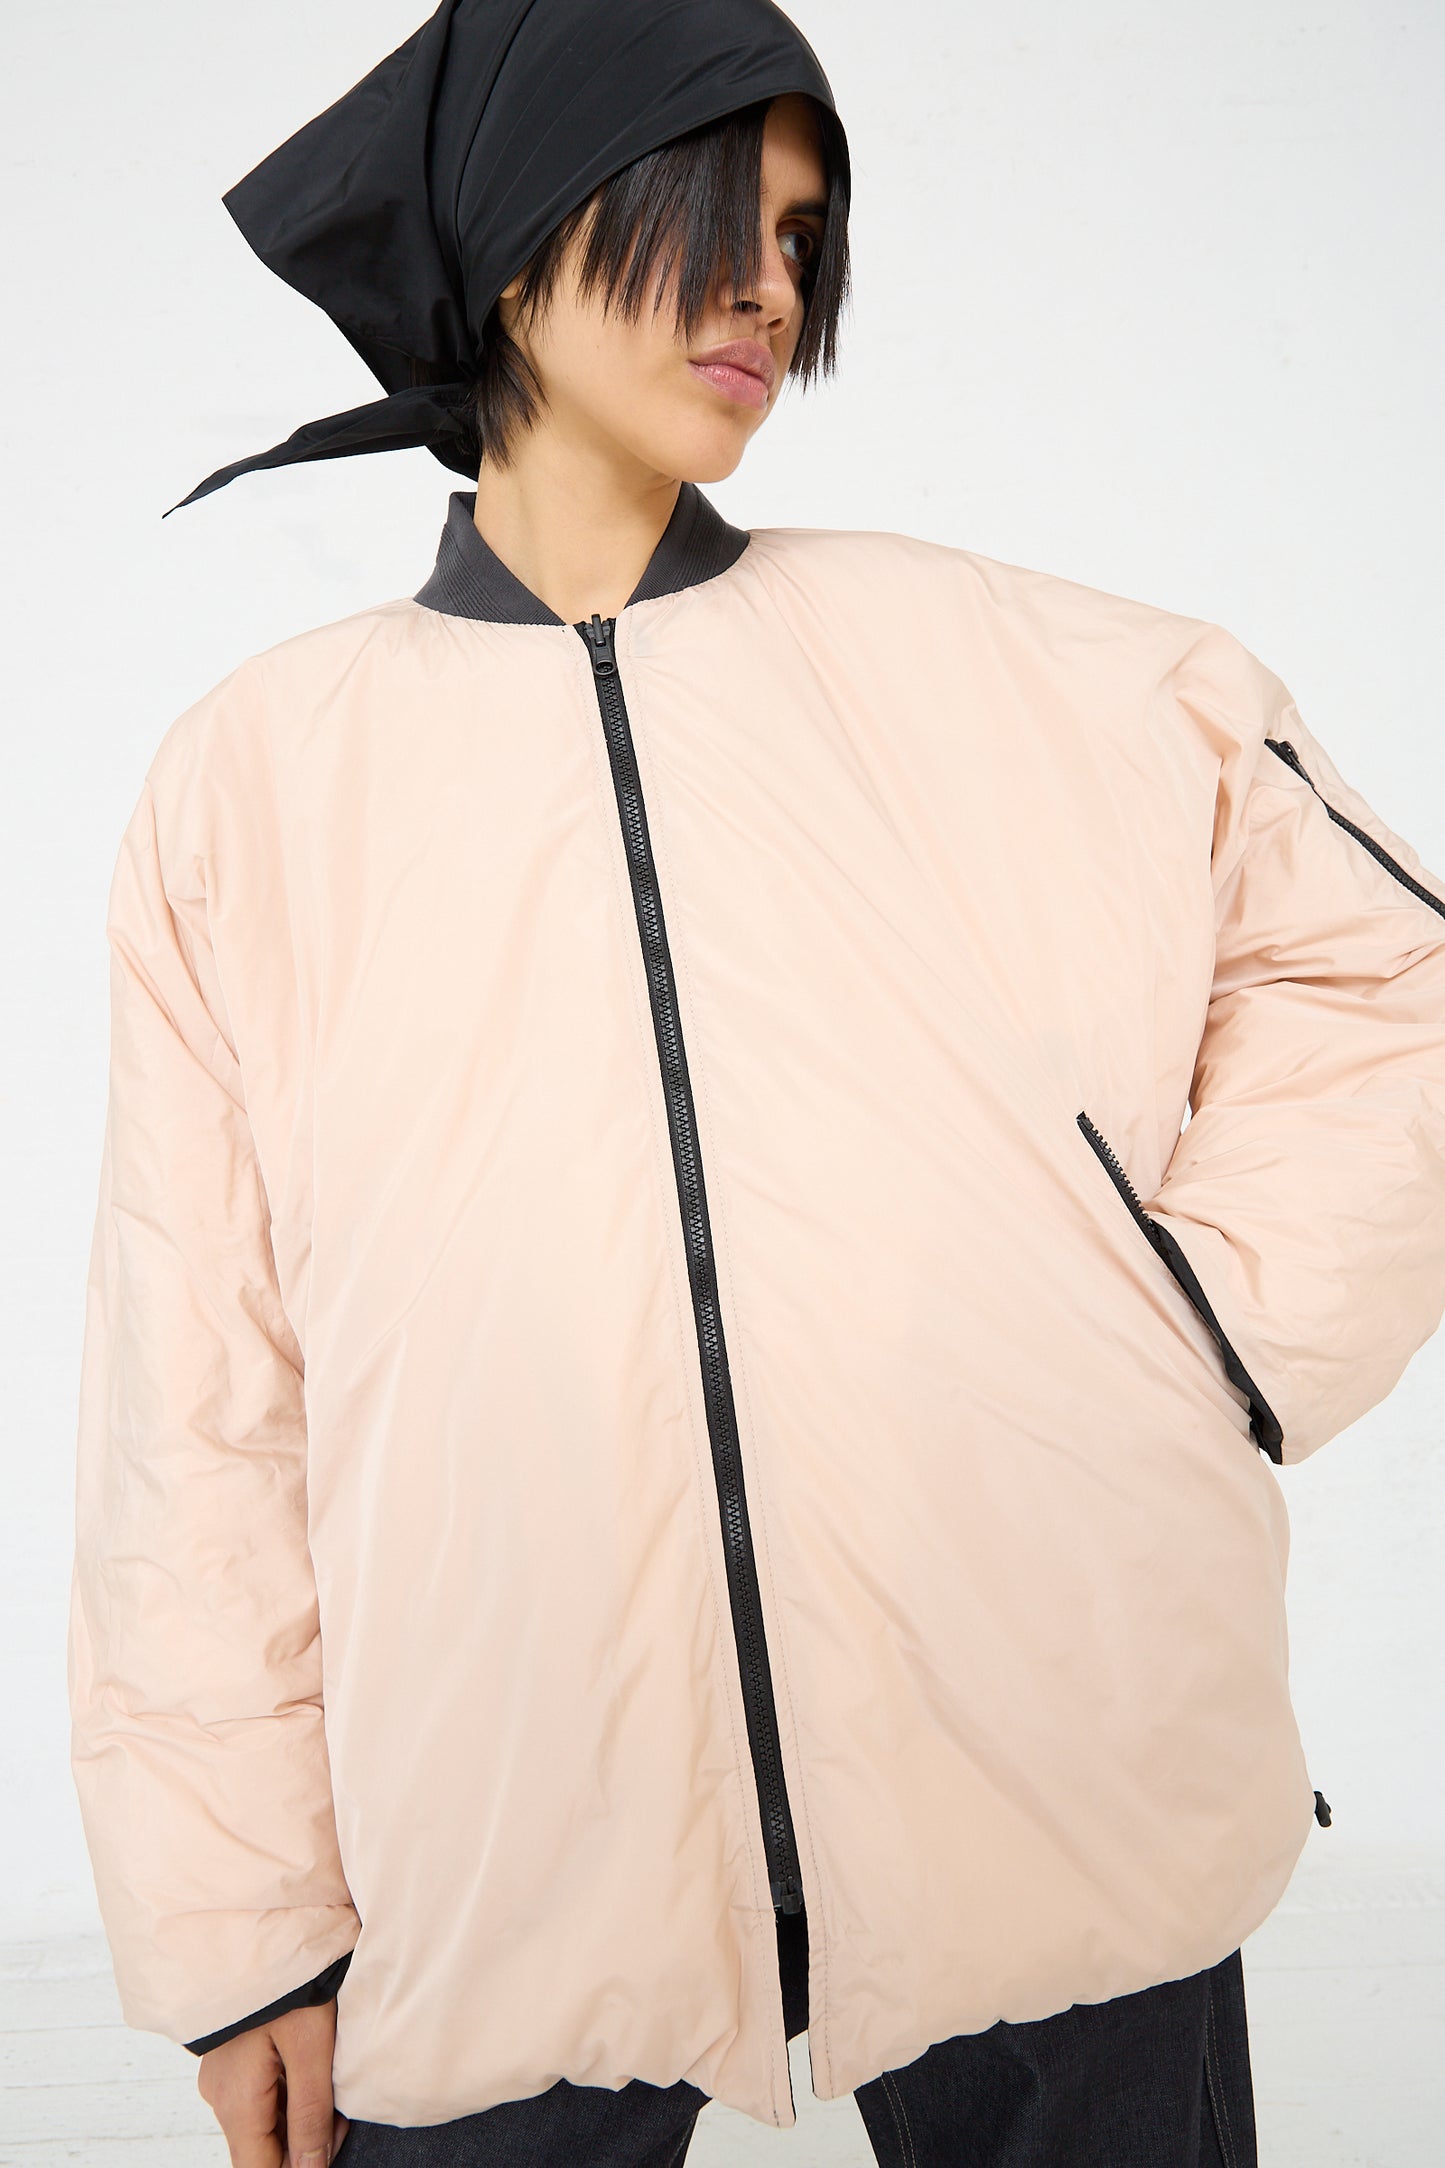 A woman wearing a pink Quilted Down Reversible Orion Bomber jacket by Sofie D'Hoore and a black hat.